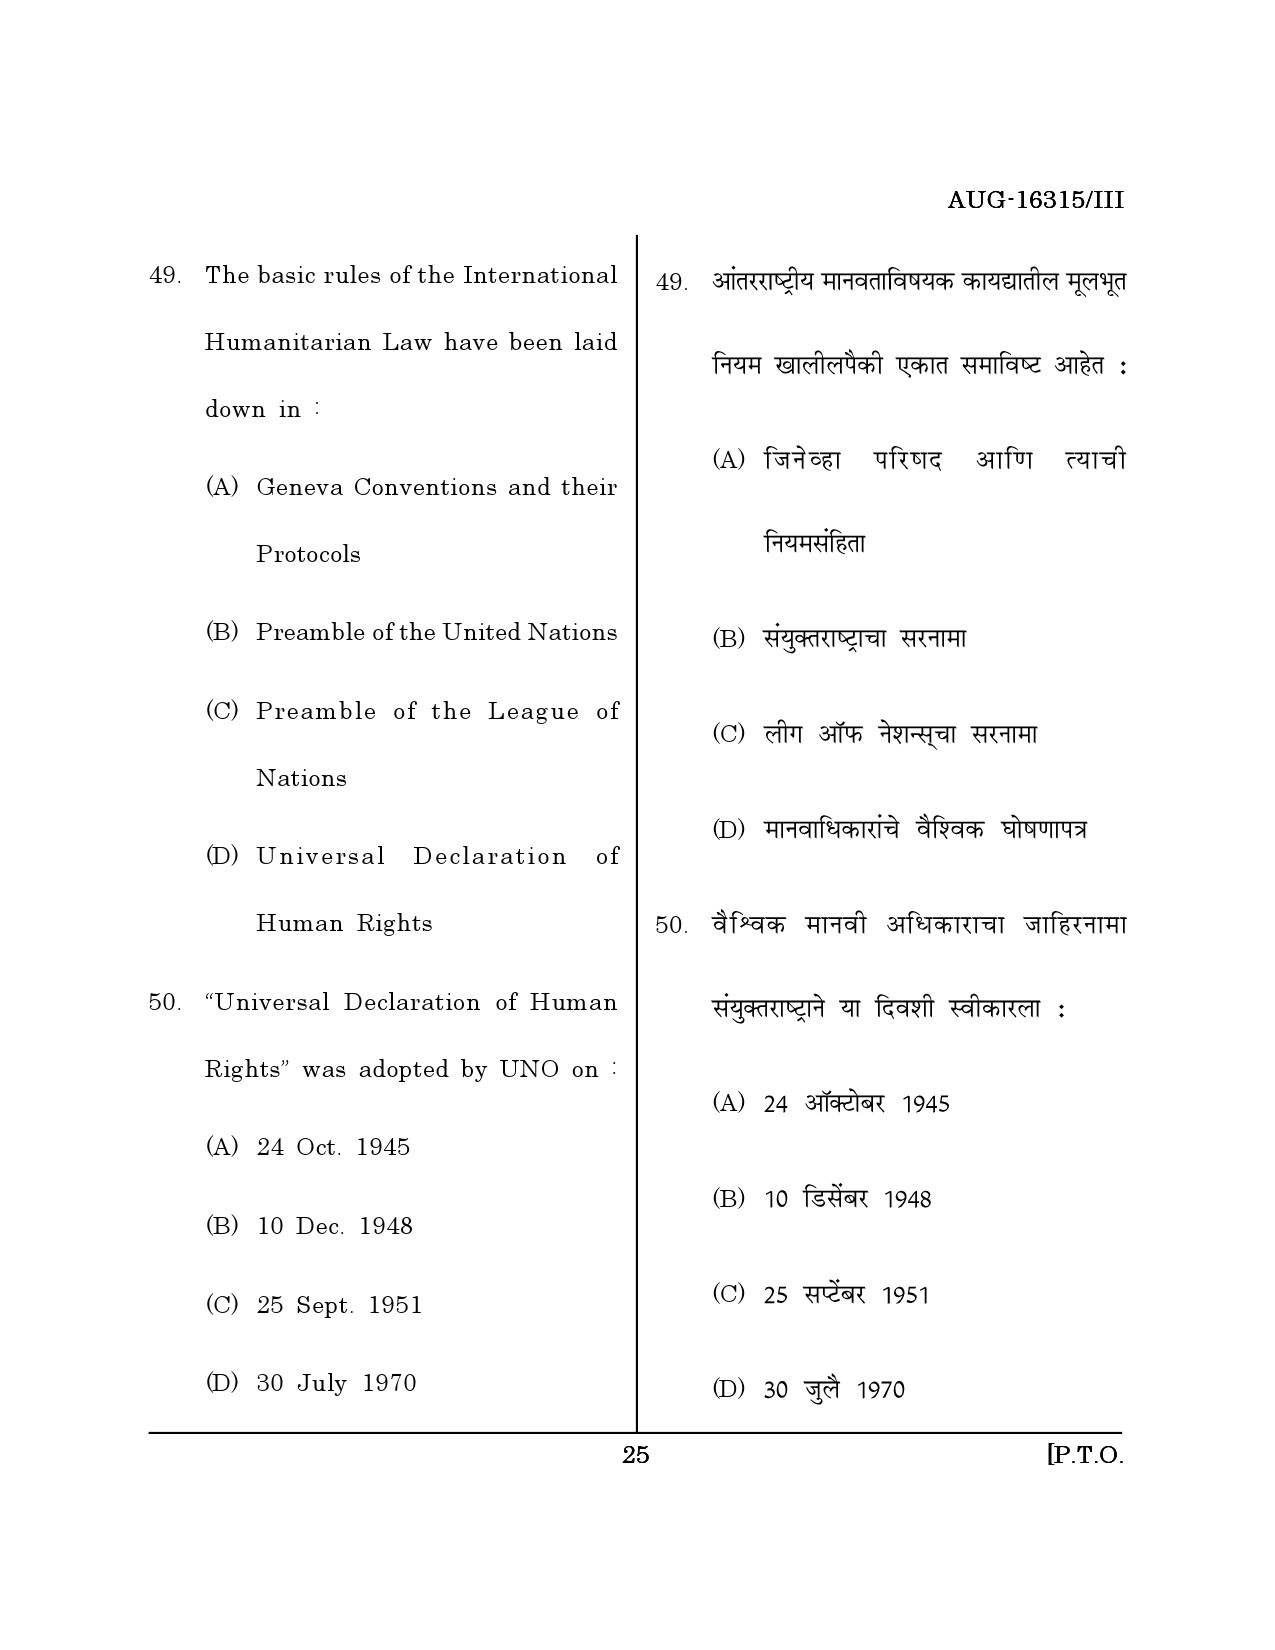 Maharashtra SET Defence and Strategic Studies Question Paper III August 2015 24